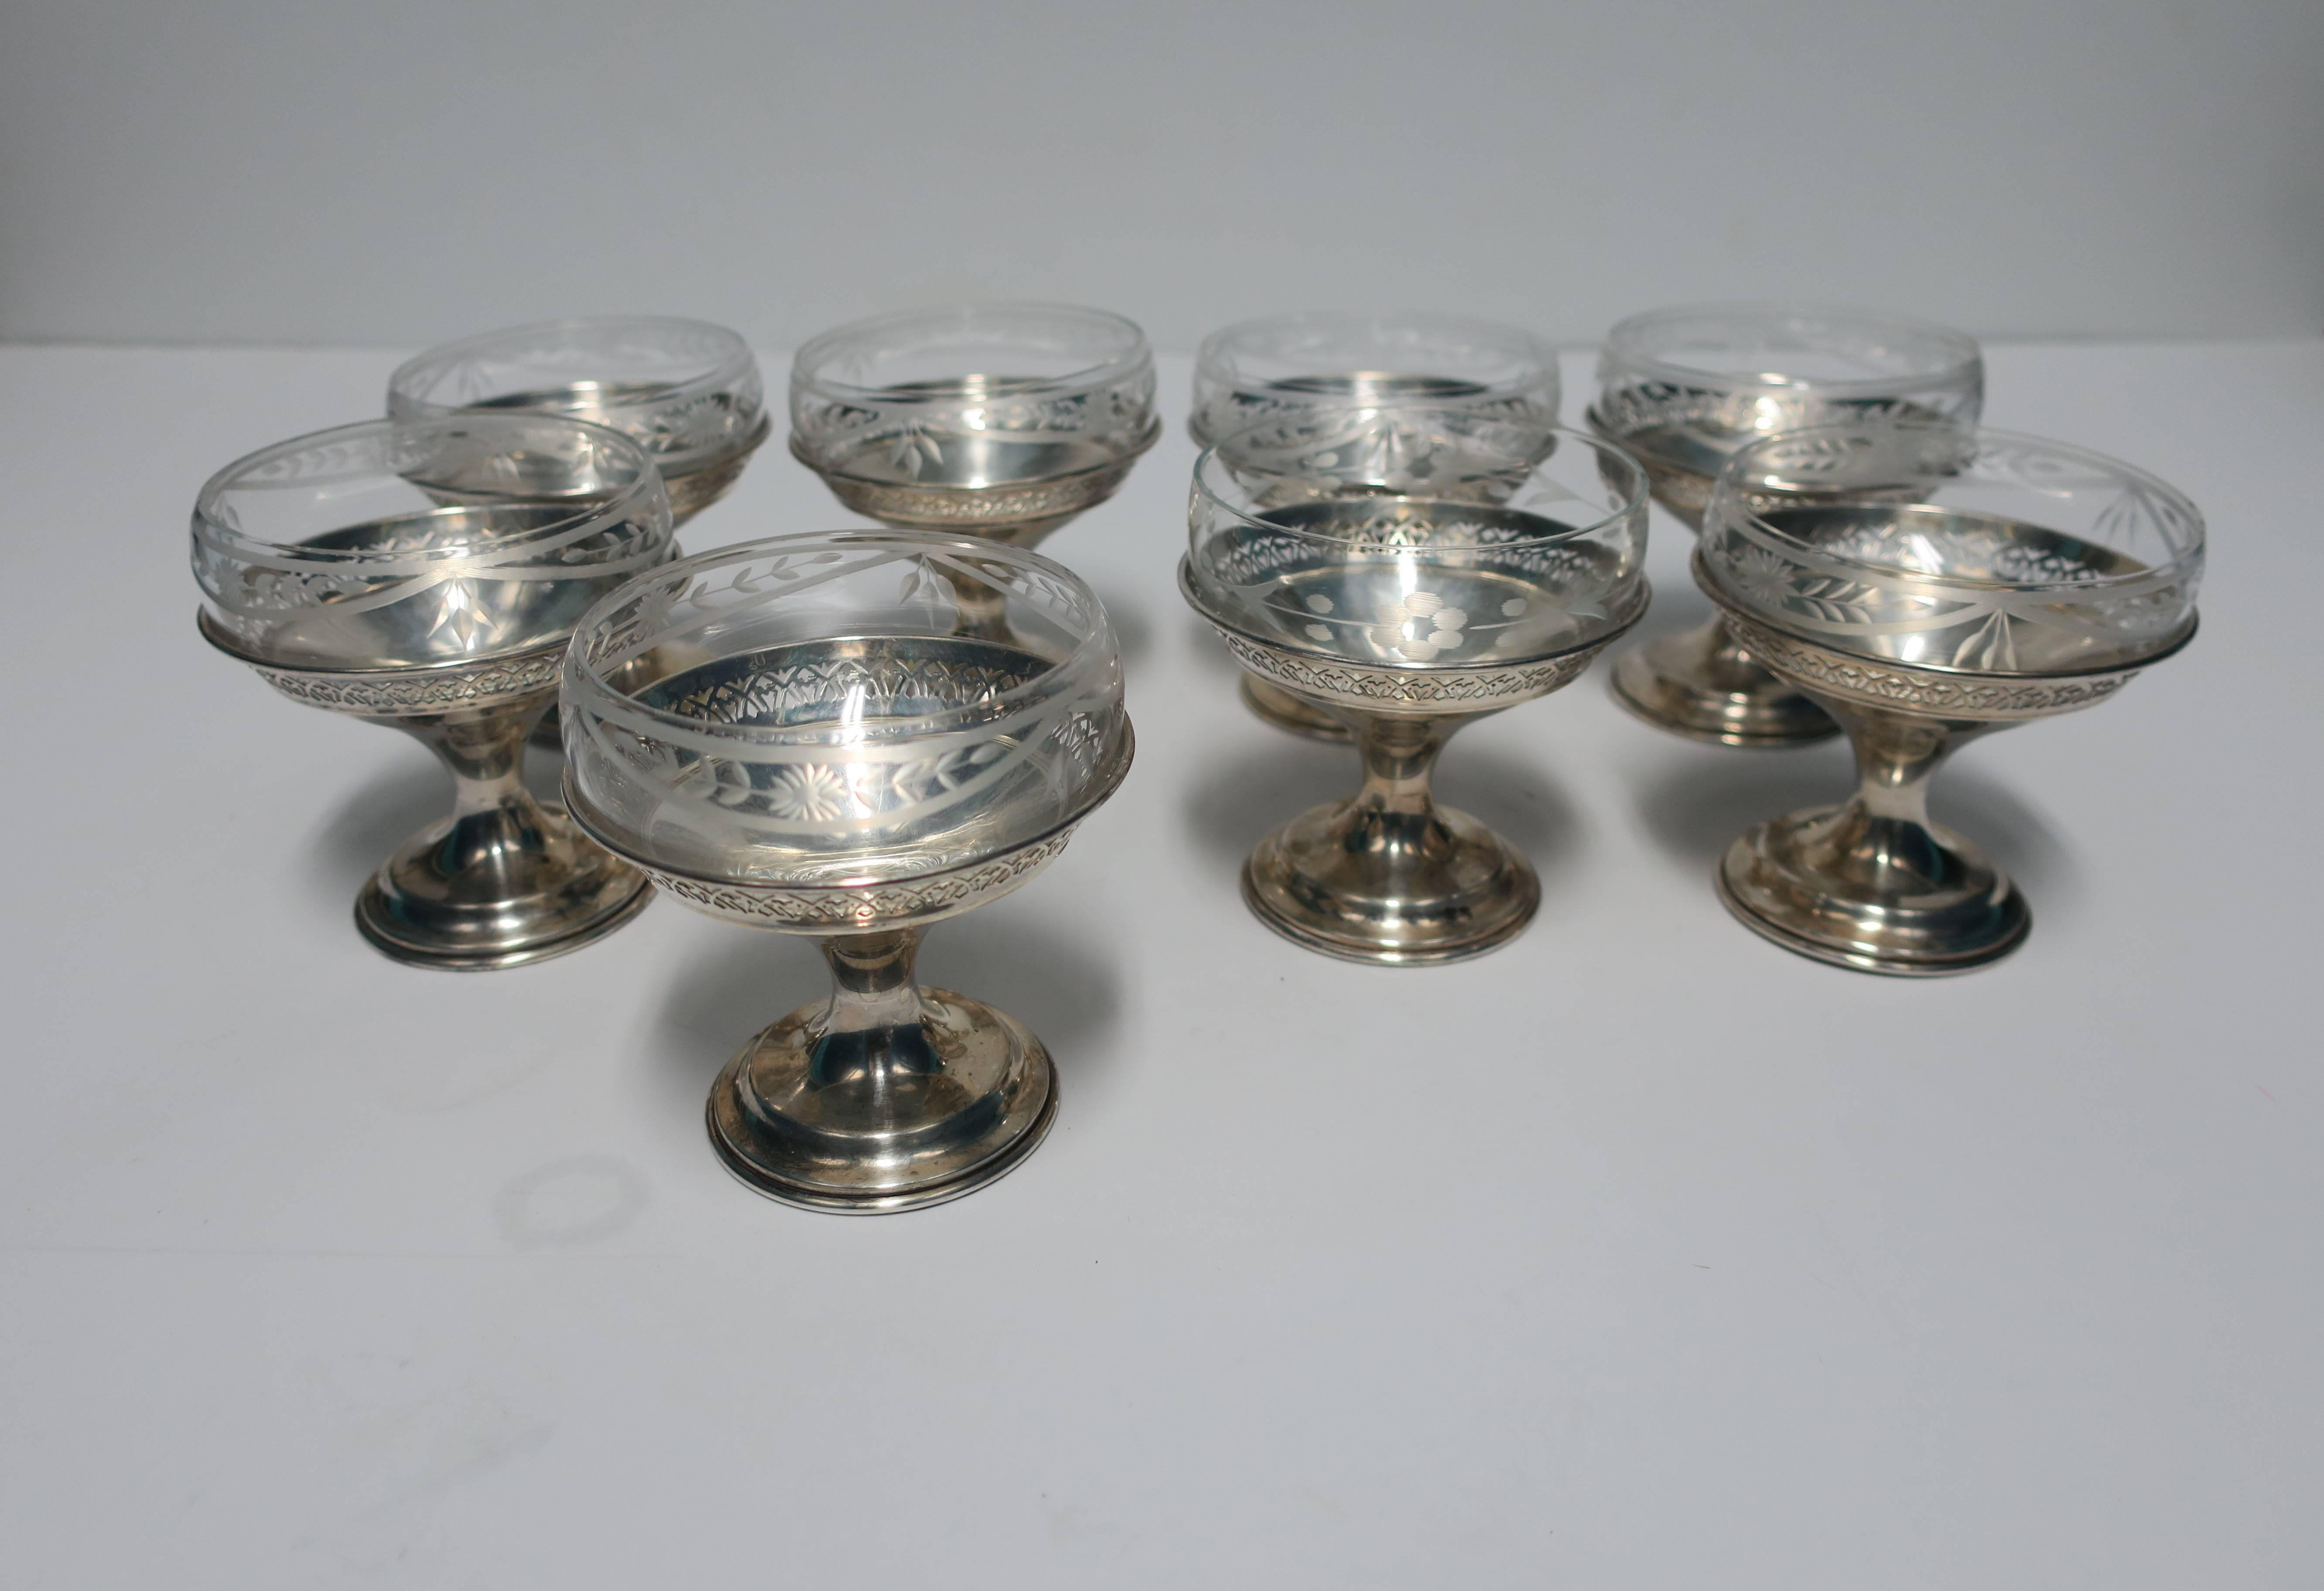 Etched Set of 8 Sterling Silver & Crystal Champagne Coup or Dessert Glasses 